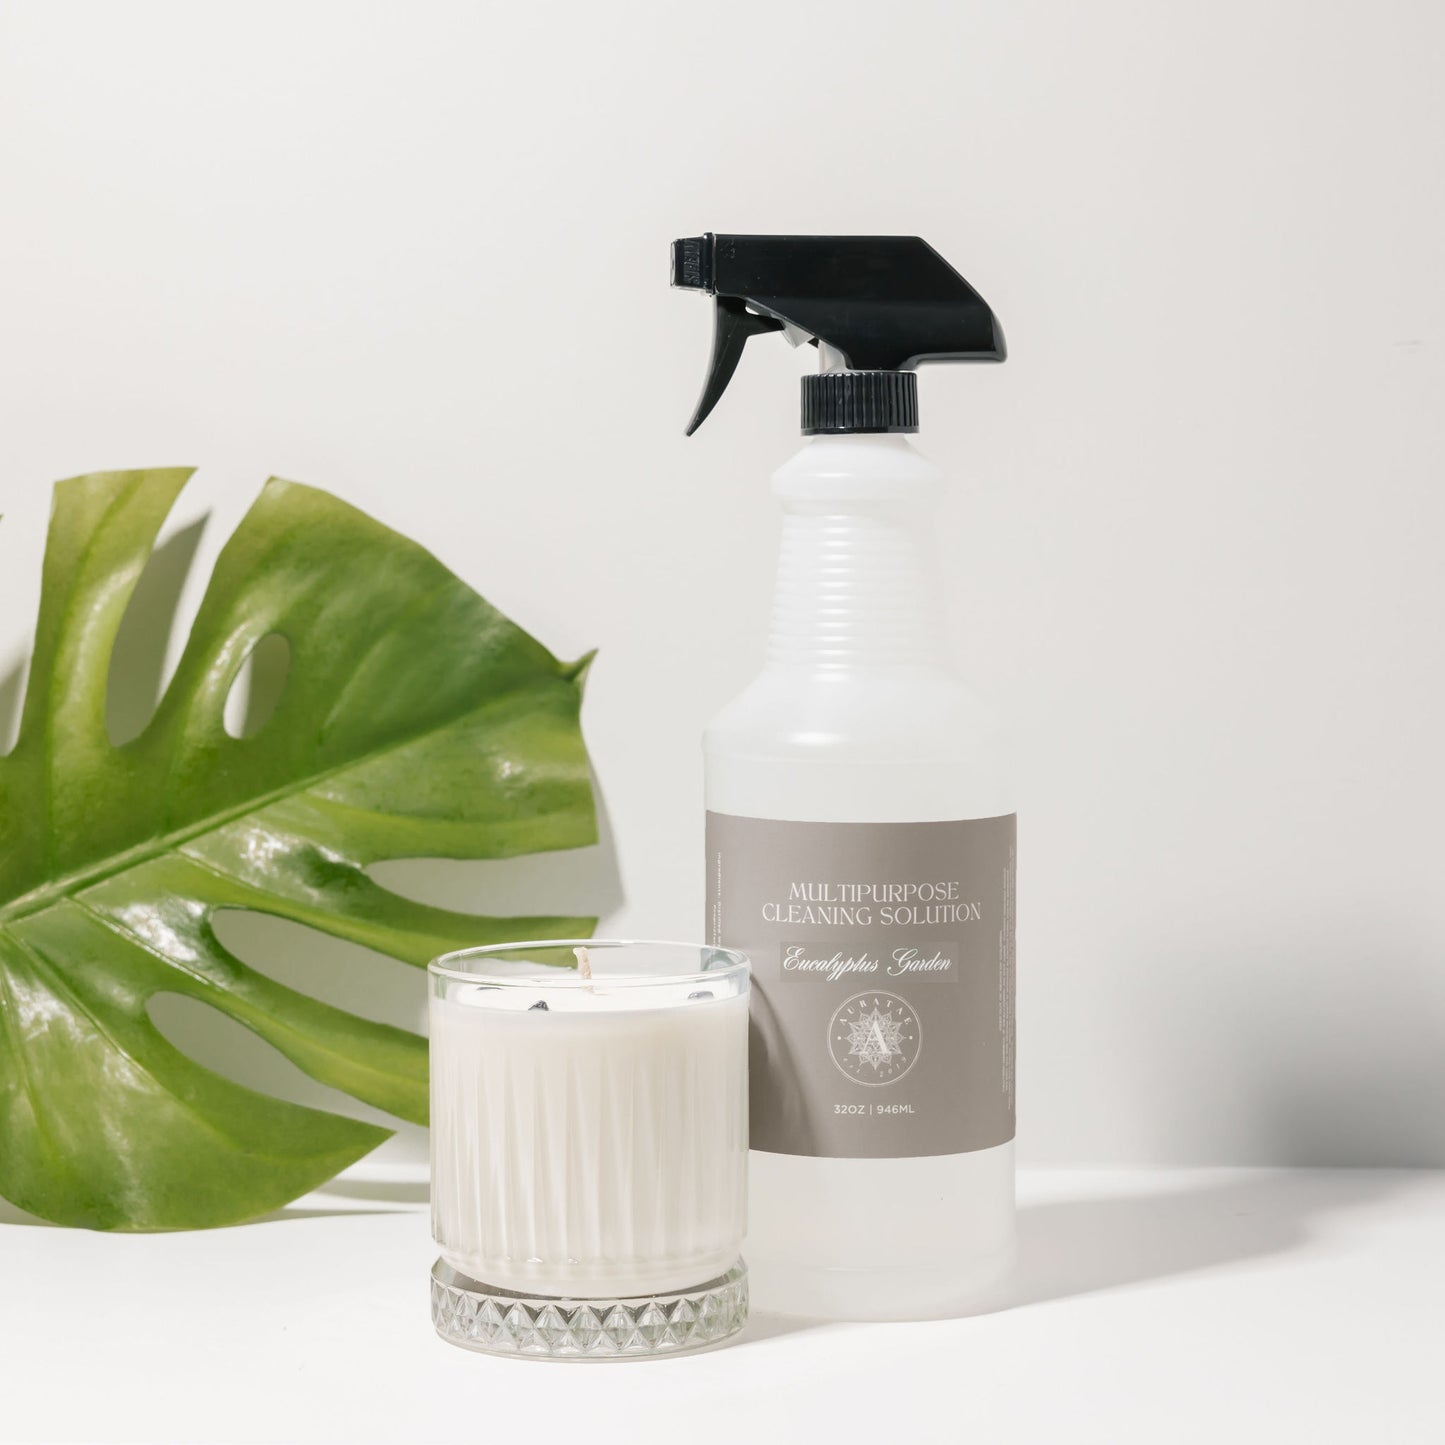 The Farmacy | Non-Toxic AuraTae Candle & Cleaner Duo